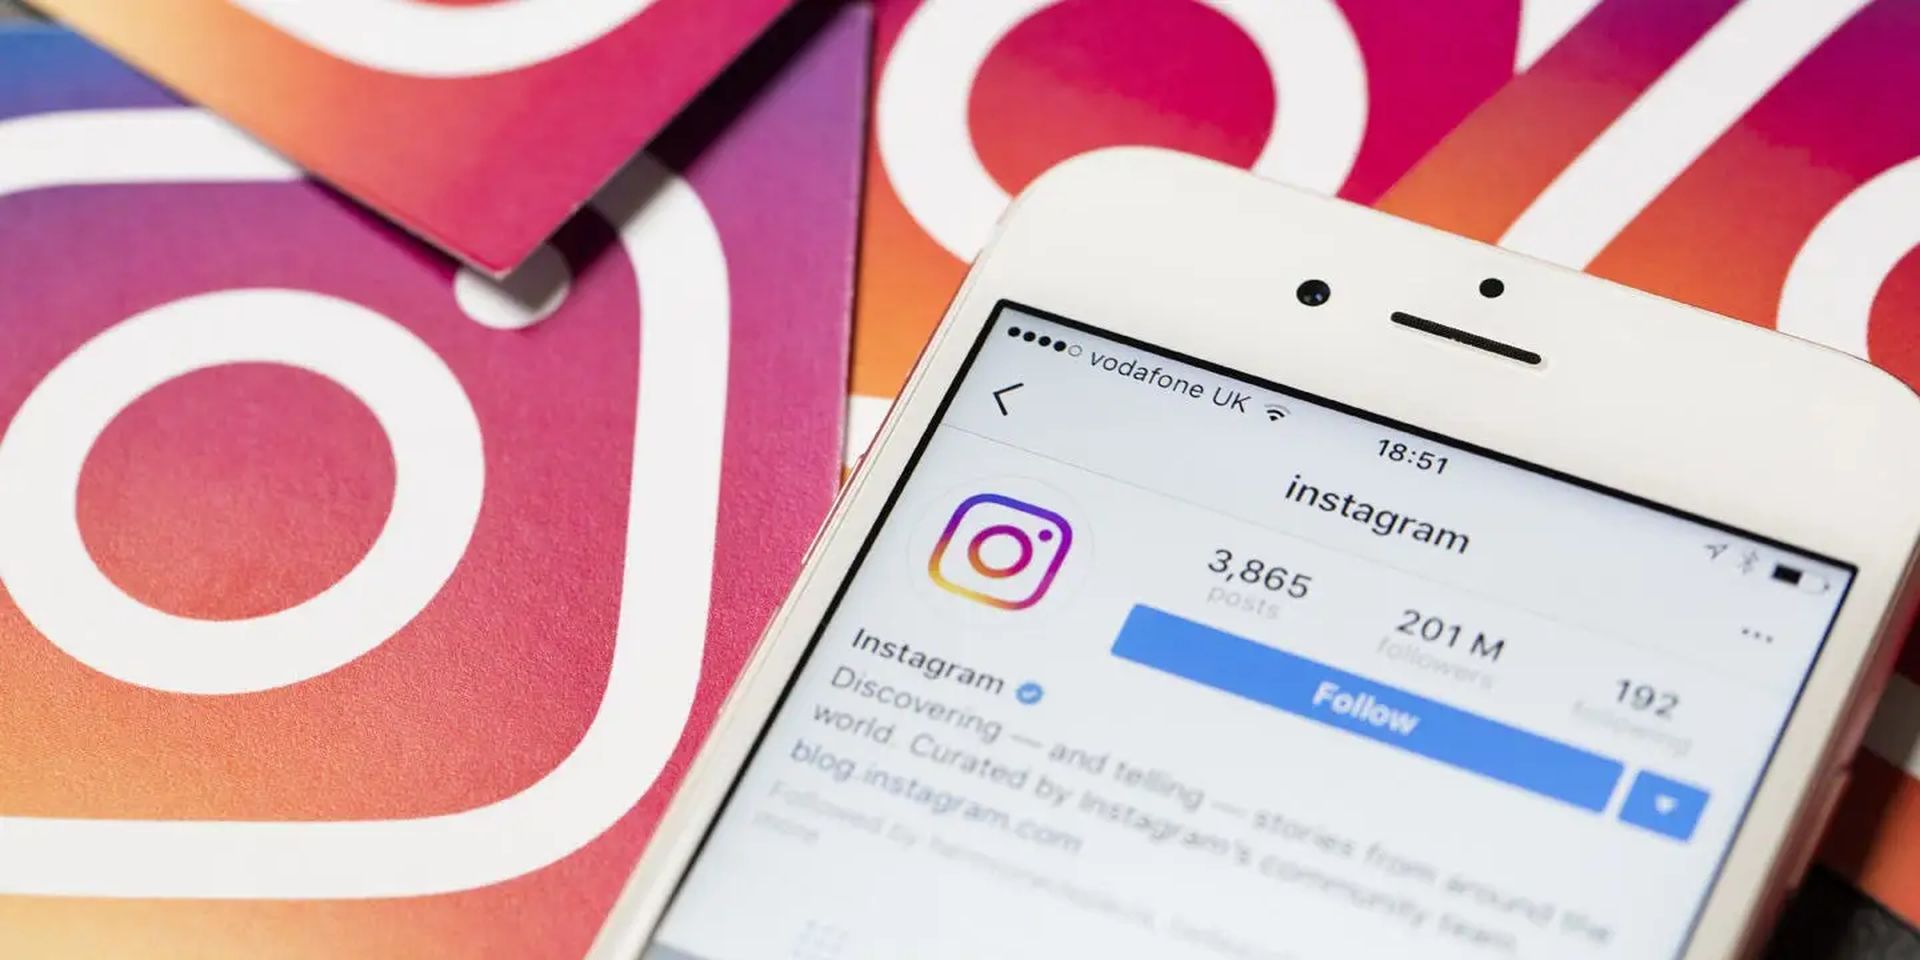 In this article, we are going to cover how to fix Instagram camera not working, so you can use the popular social media app whenever you want to.